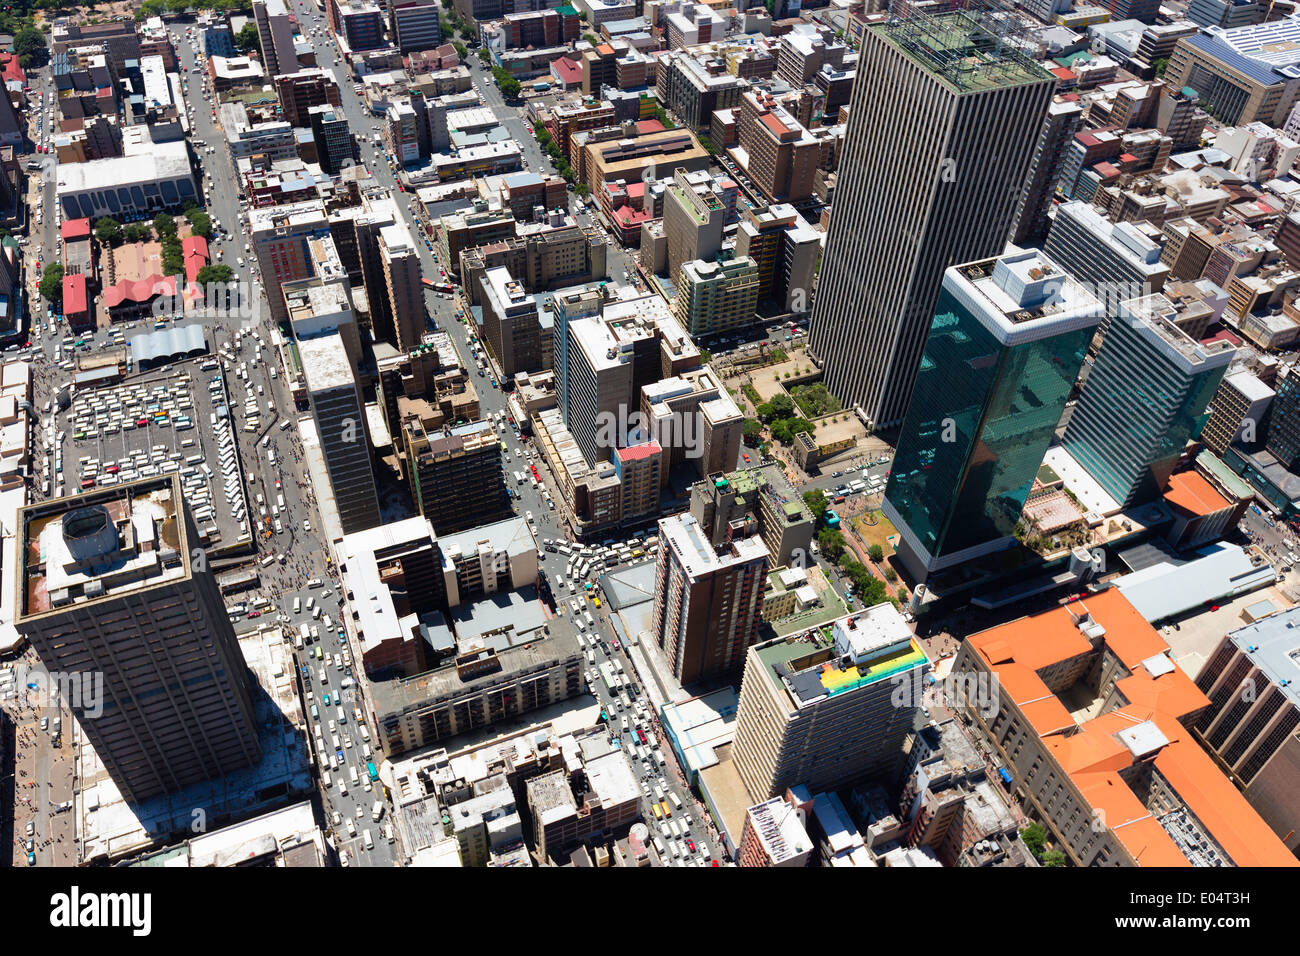 Aerial view of Jeppe Street, Johannesburg Central business district, with the skyscraper Marble towers Sanlan Centre building. Stock Photo